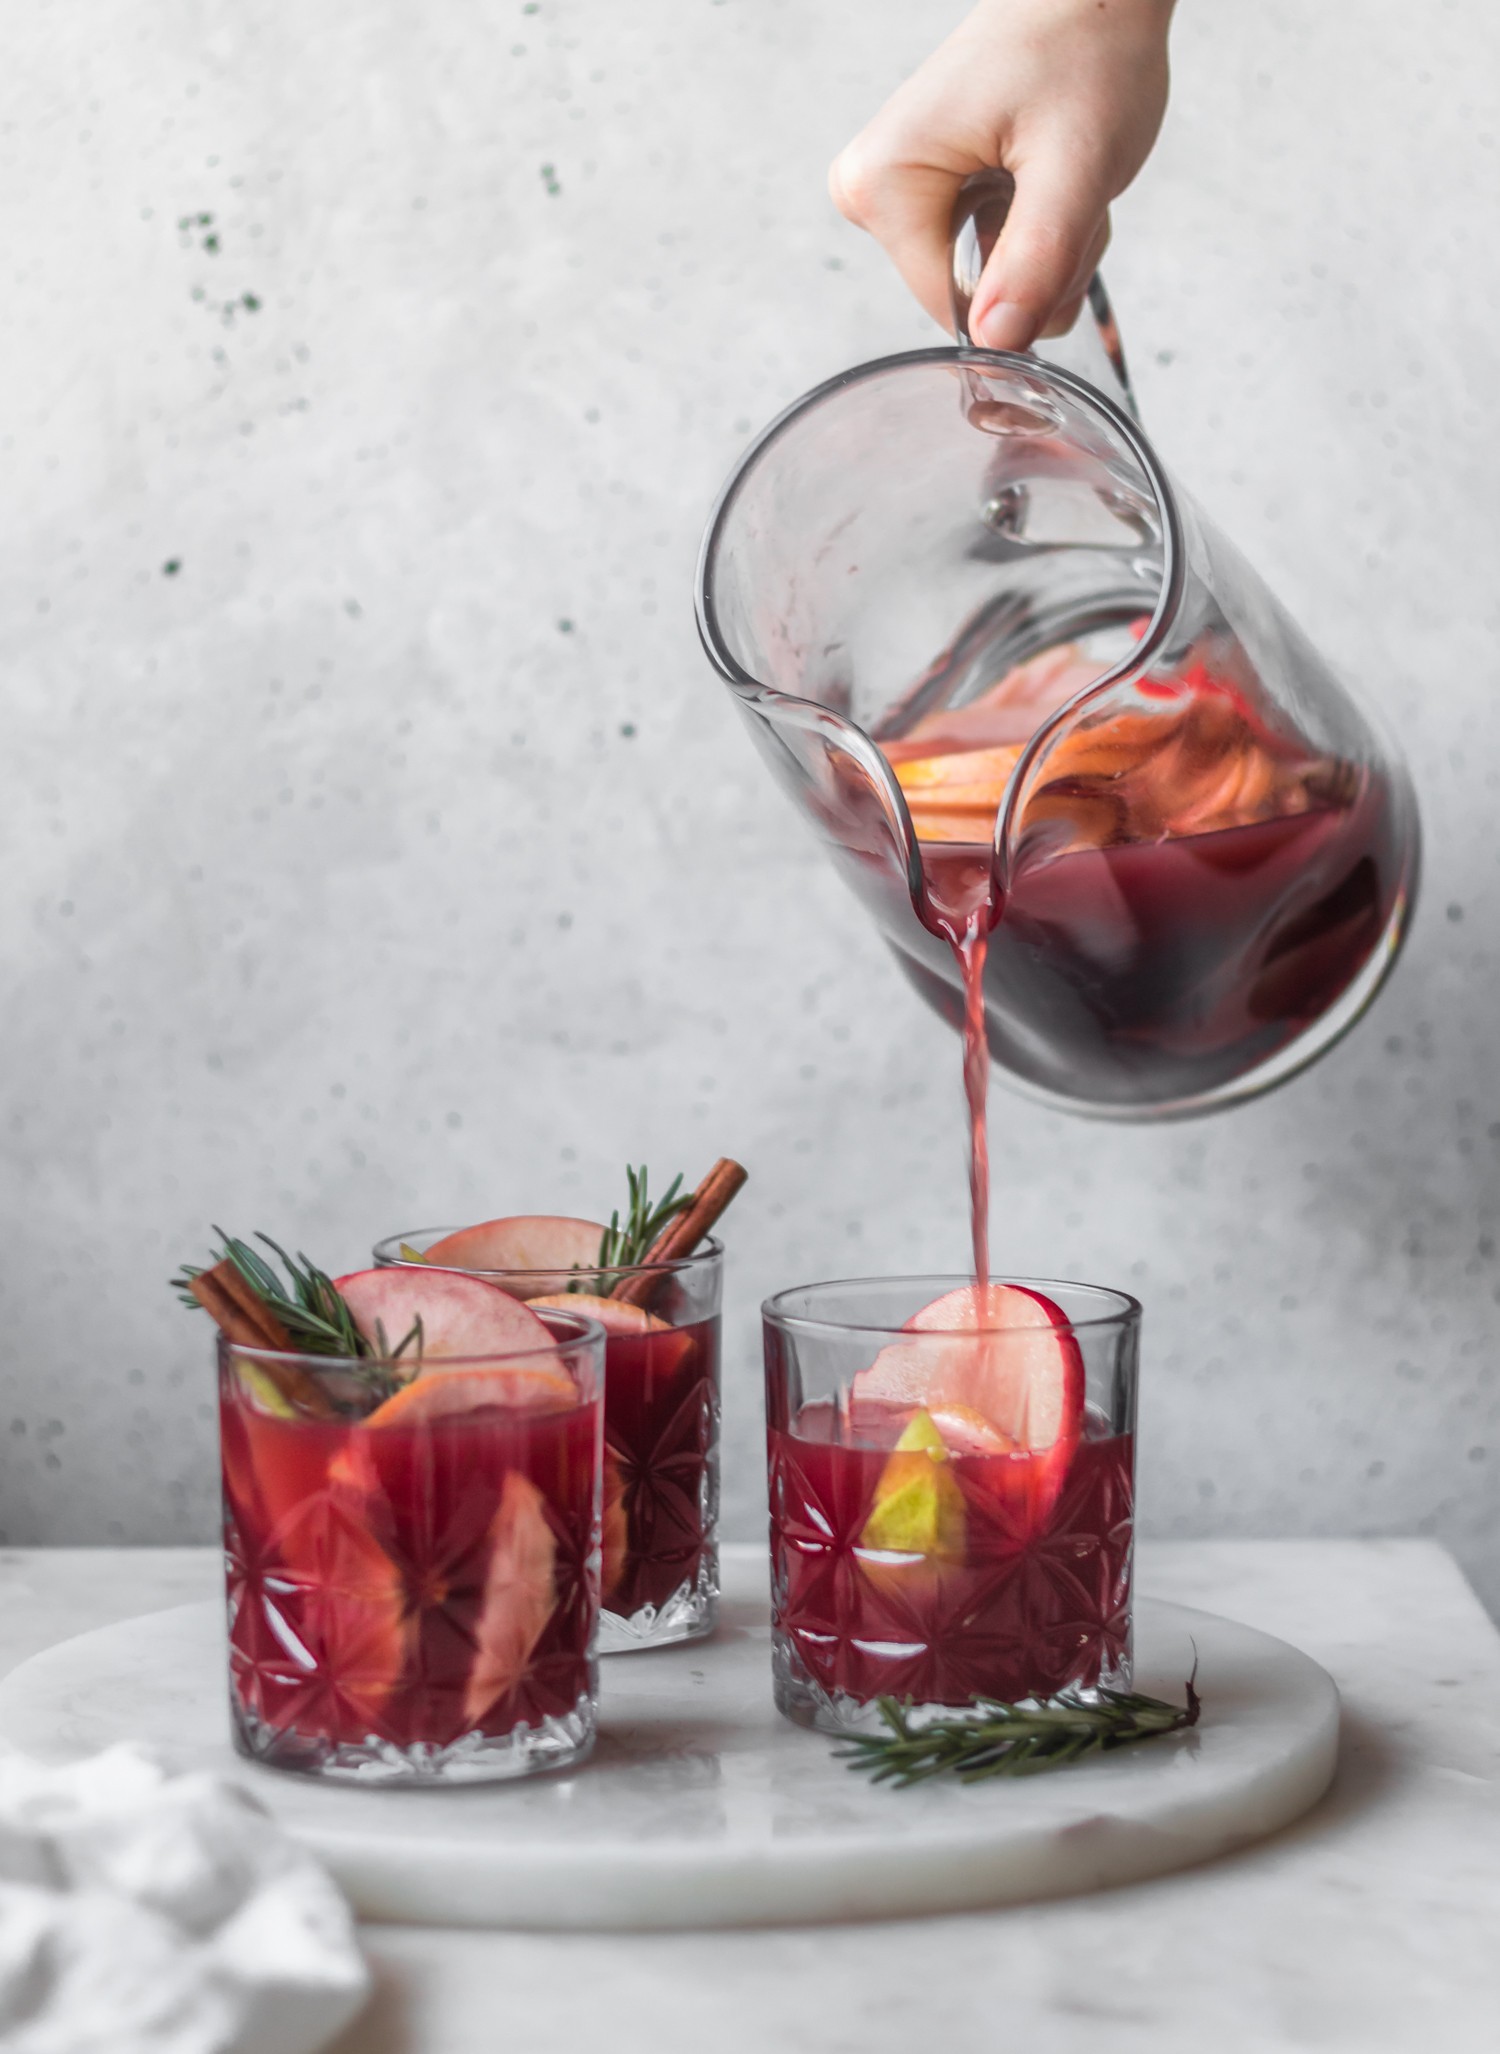 A side image of a woman's hand pouring red wine sangria into a glass of fruit on a marble counter next to two more glasses of sangria.